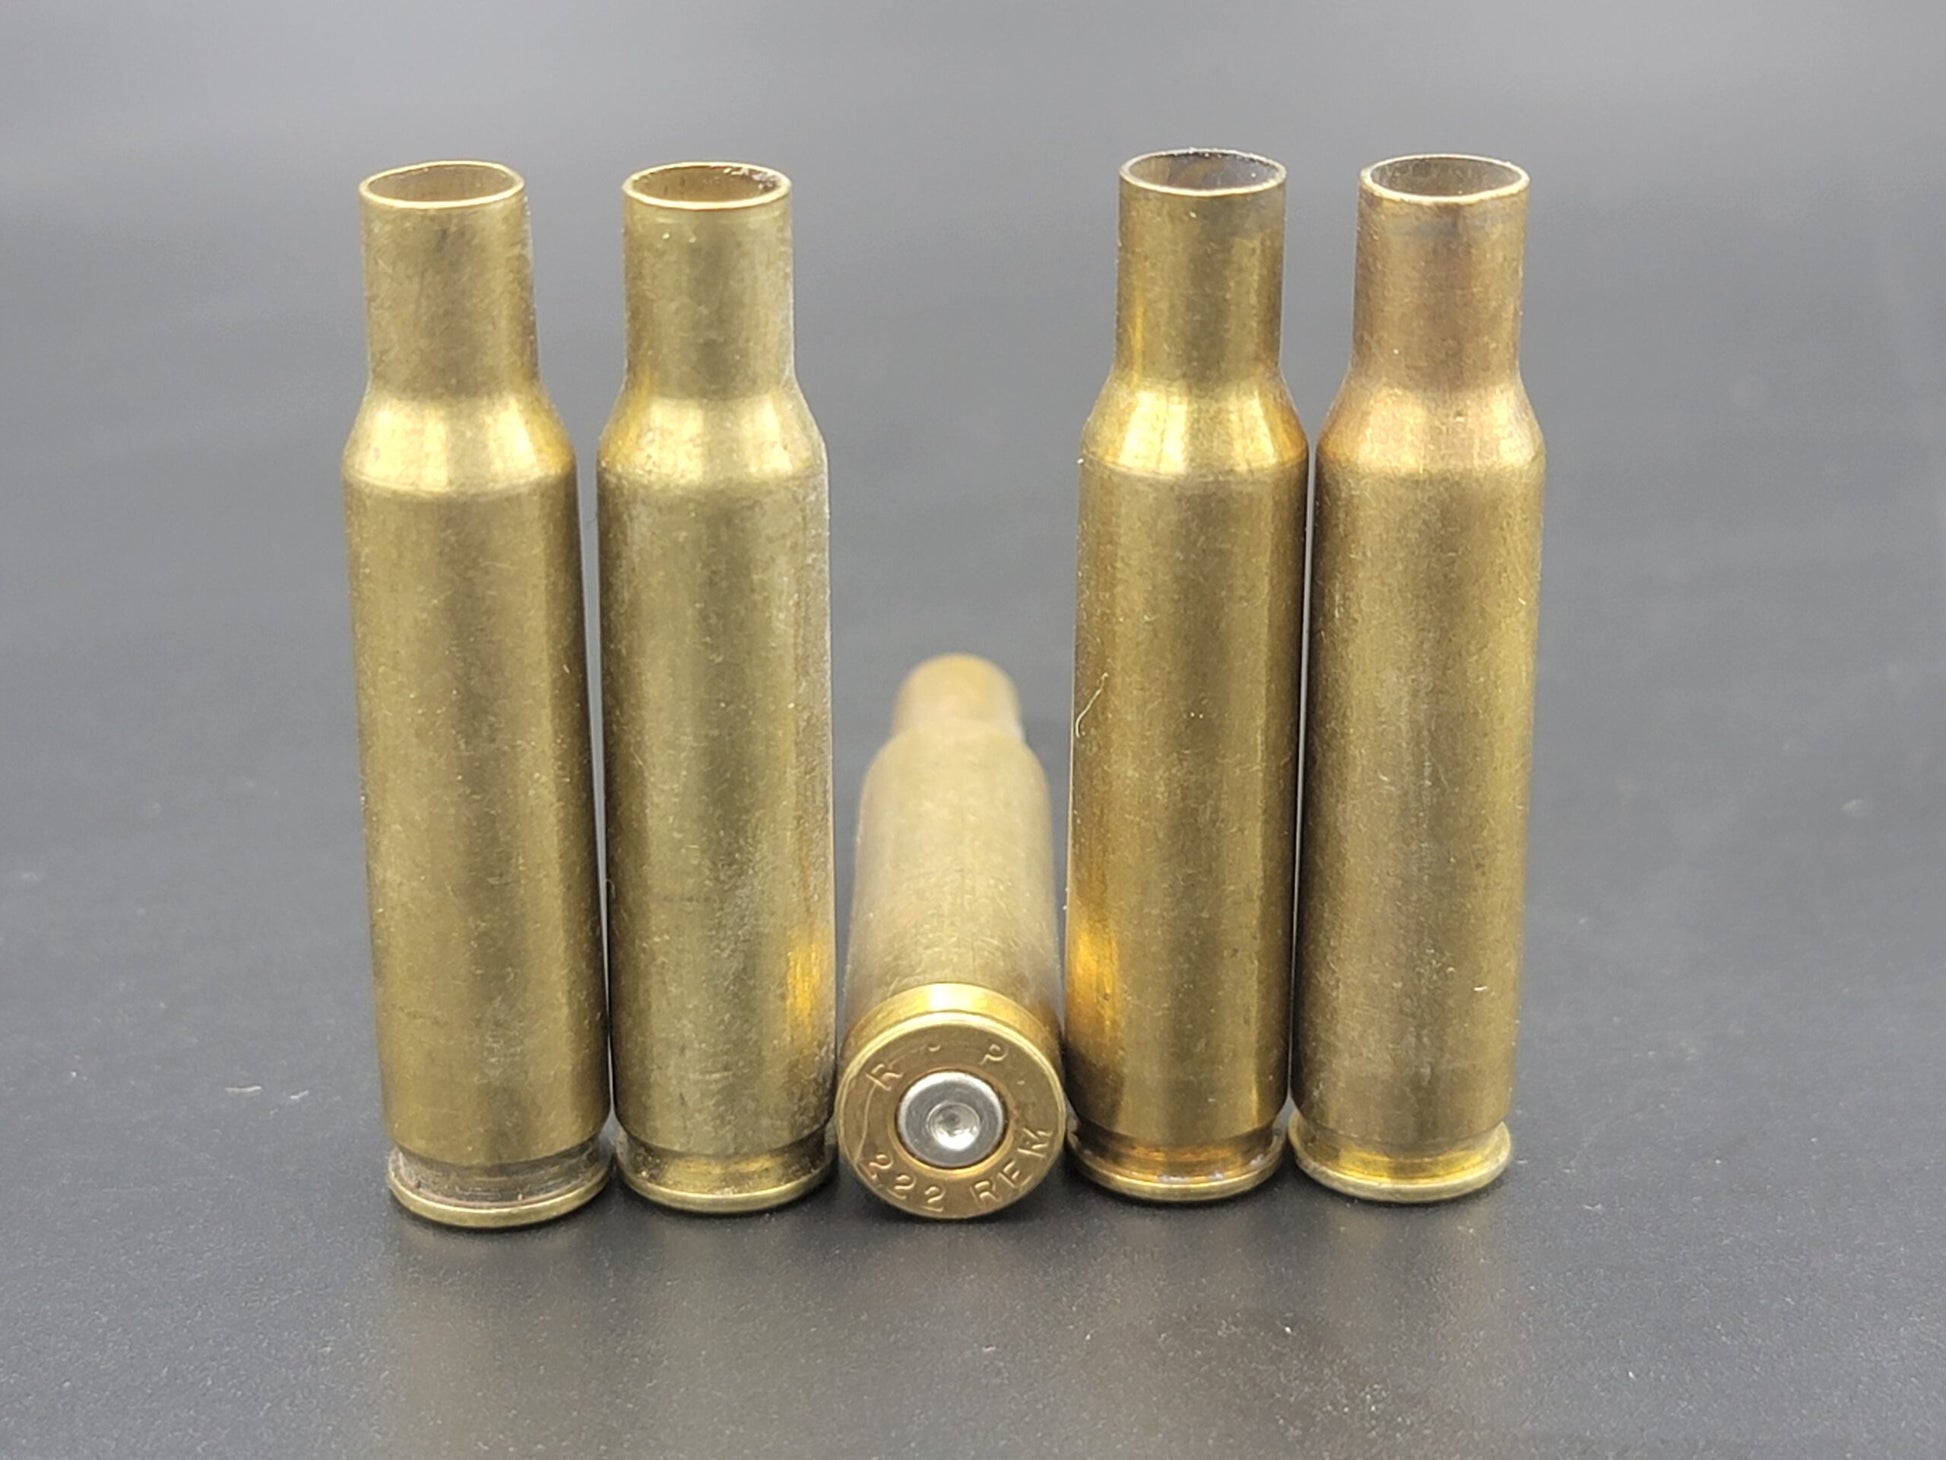 222 Rem once fired rifle brass. Hand sorted from reputable indoor/military ranges for reloading. Reliable spent casings for precision shooting.